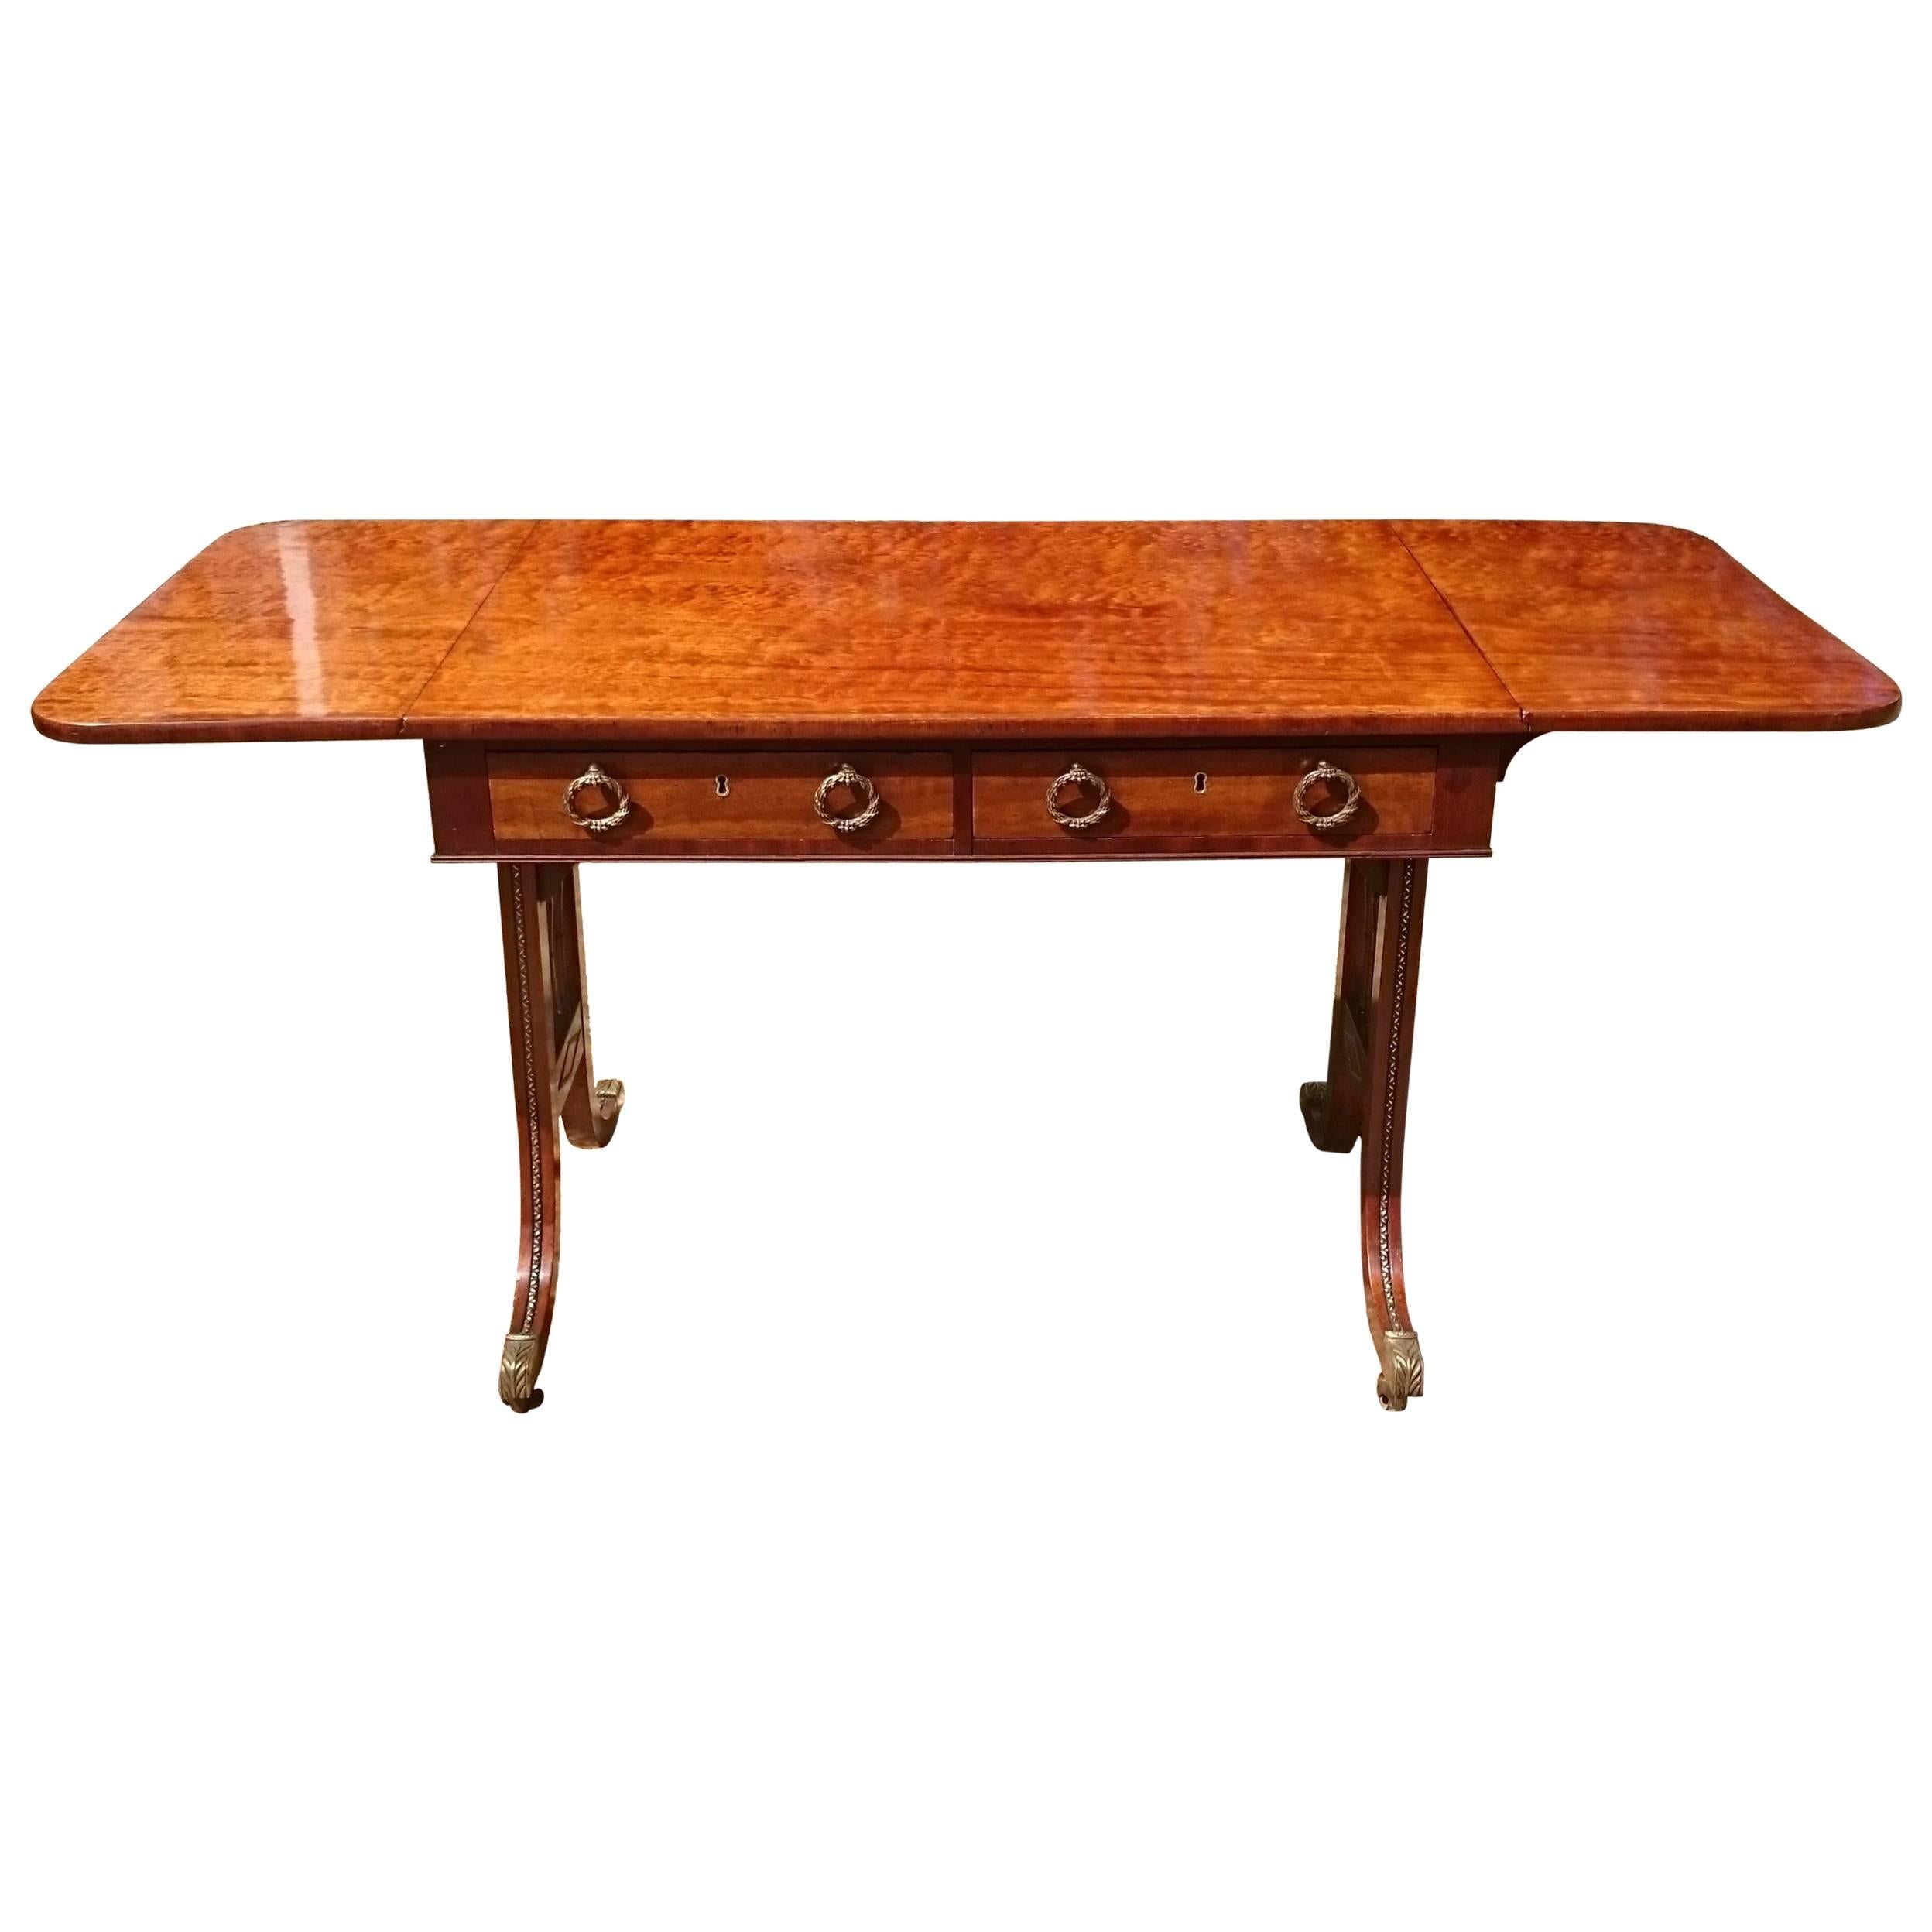 Very Fine Quality Early 19th Century Regency Mahogany Antique Sofa Table For Sale